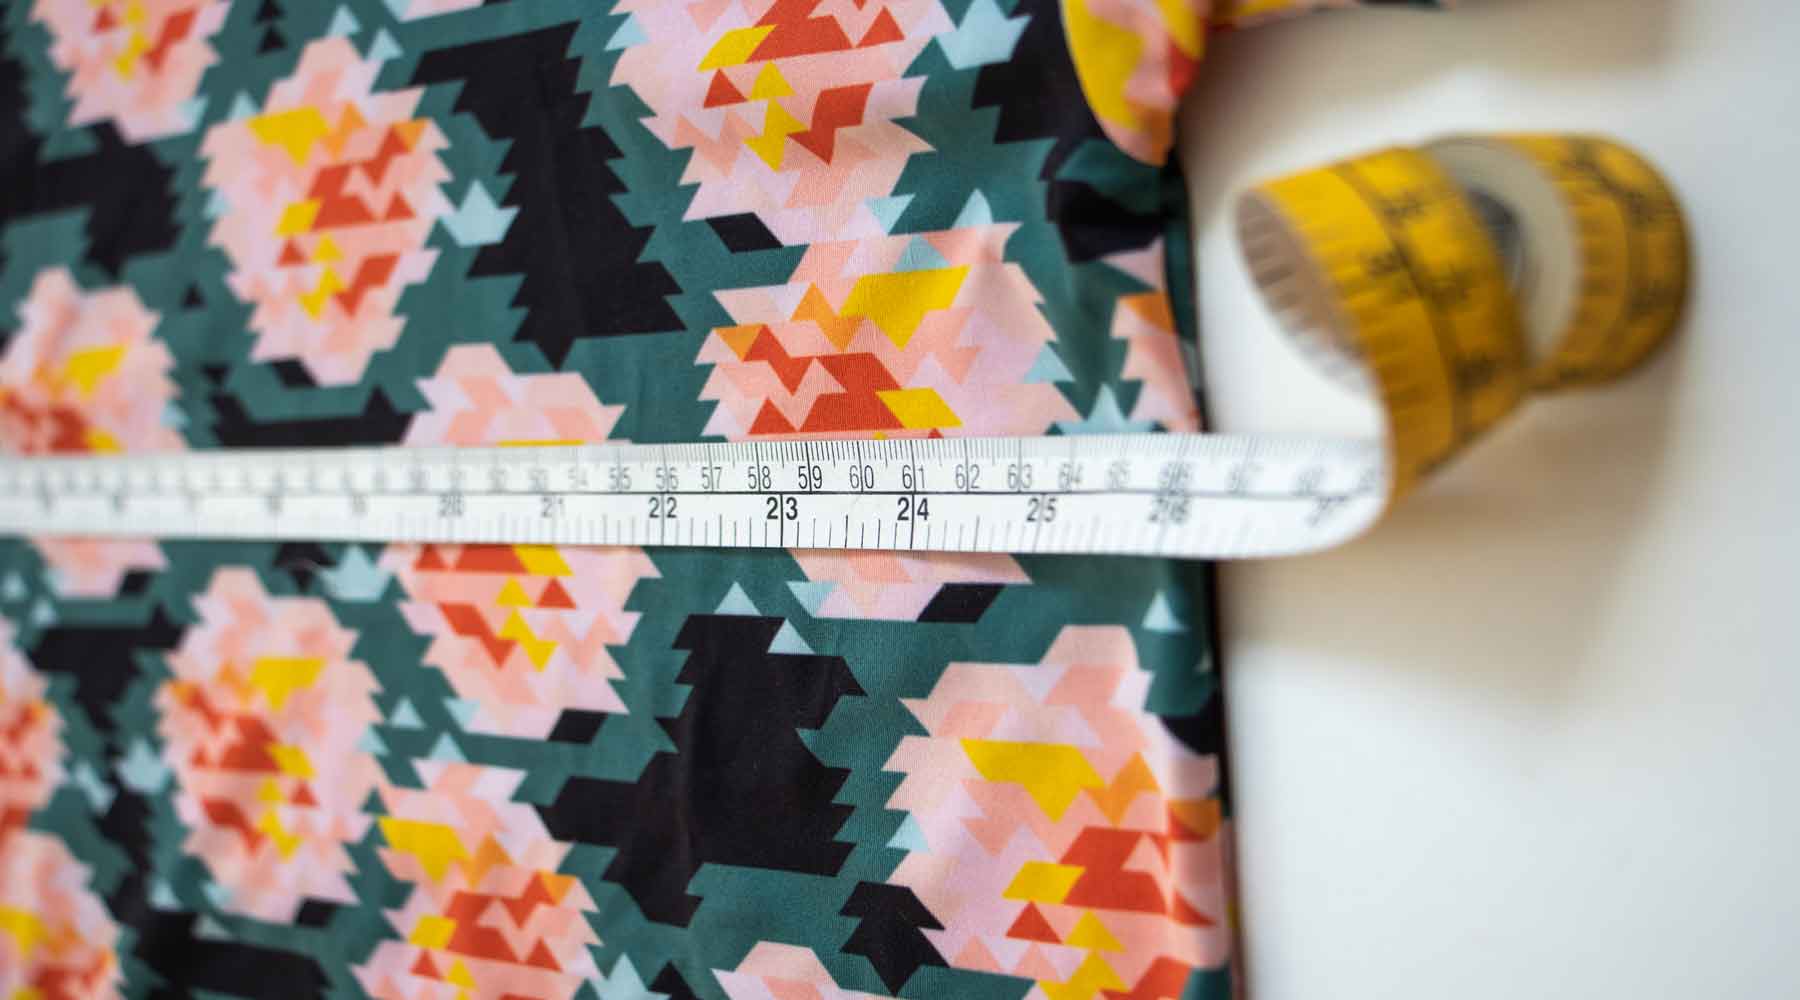 How to measure the bust measurement of a garment to help find your perfect fit